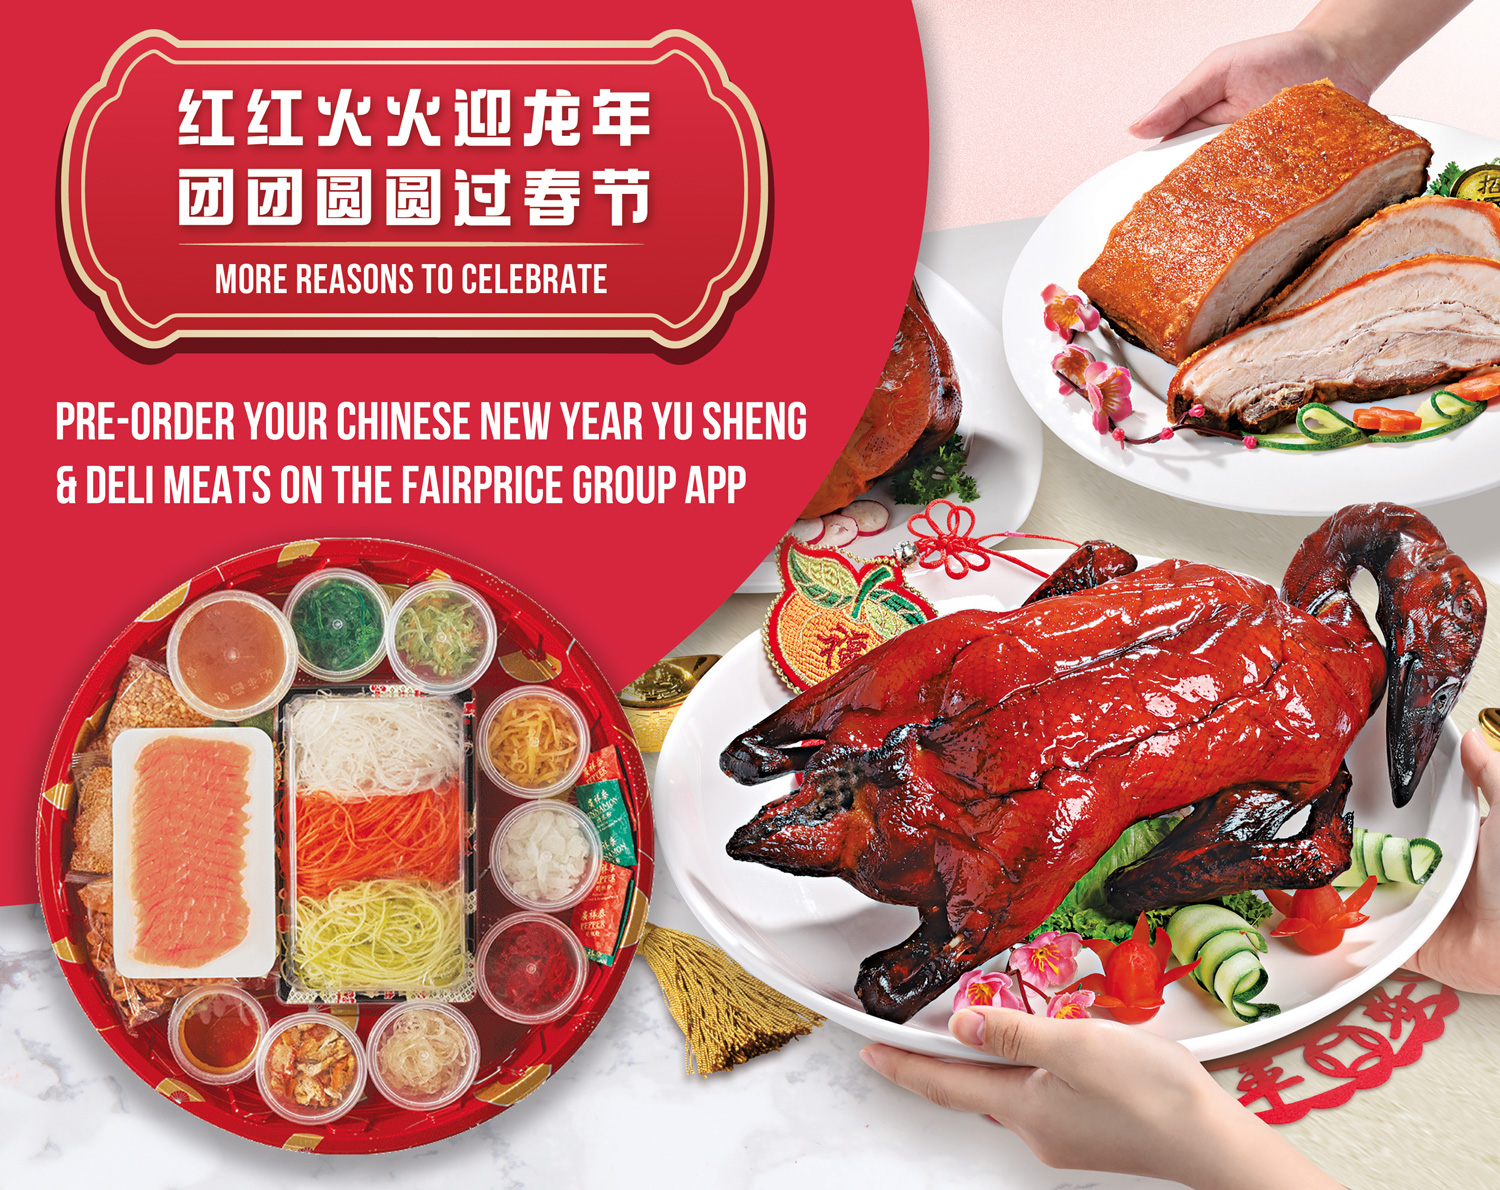 Chinese New Year Deli: Delicious food to order for pick-up in-store